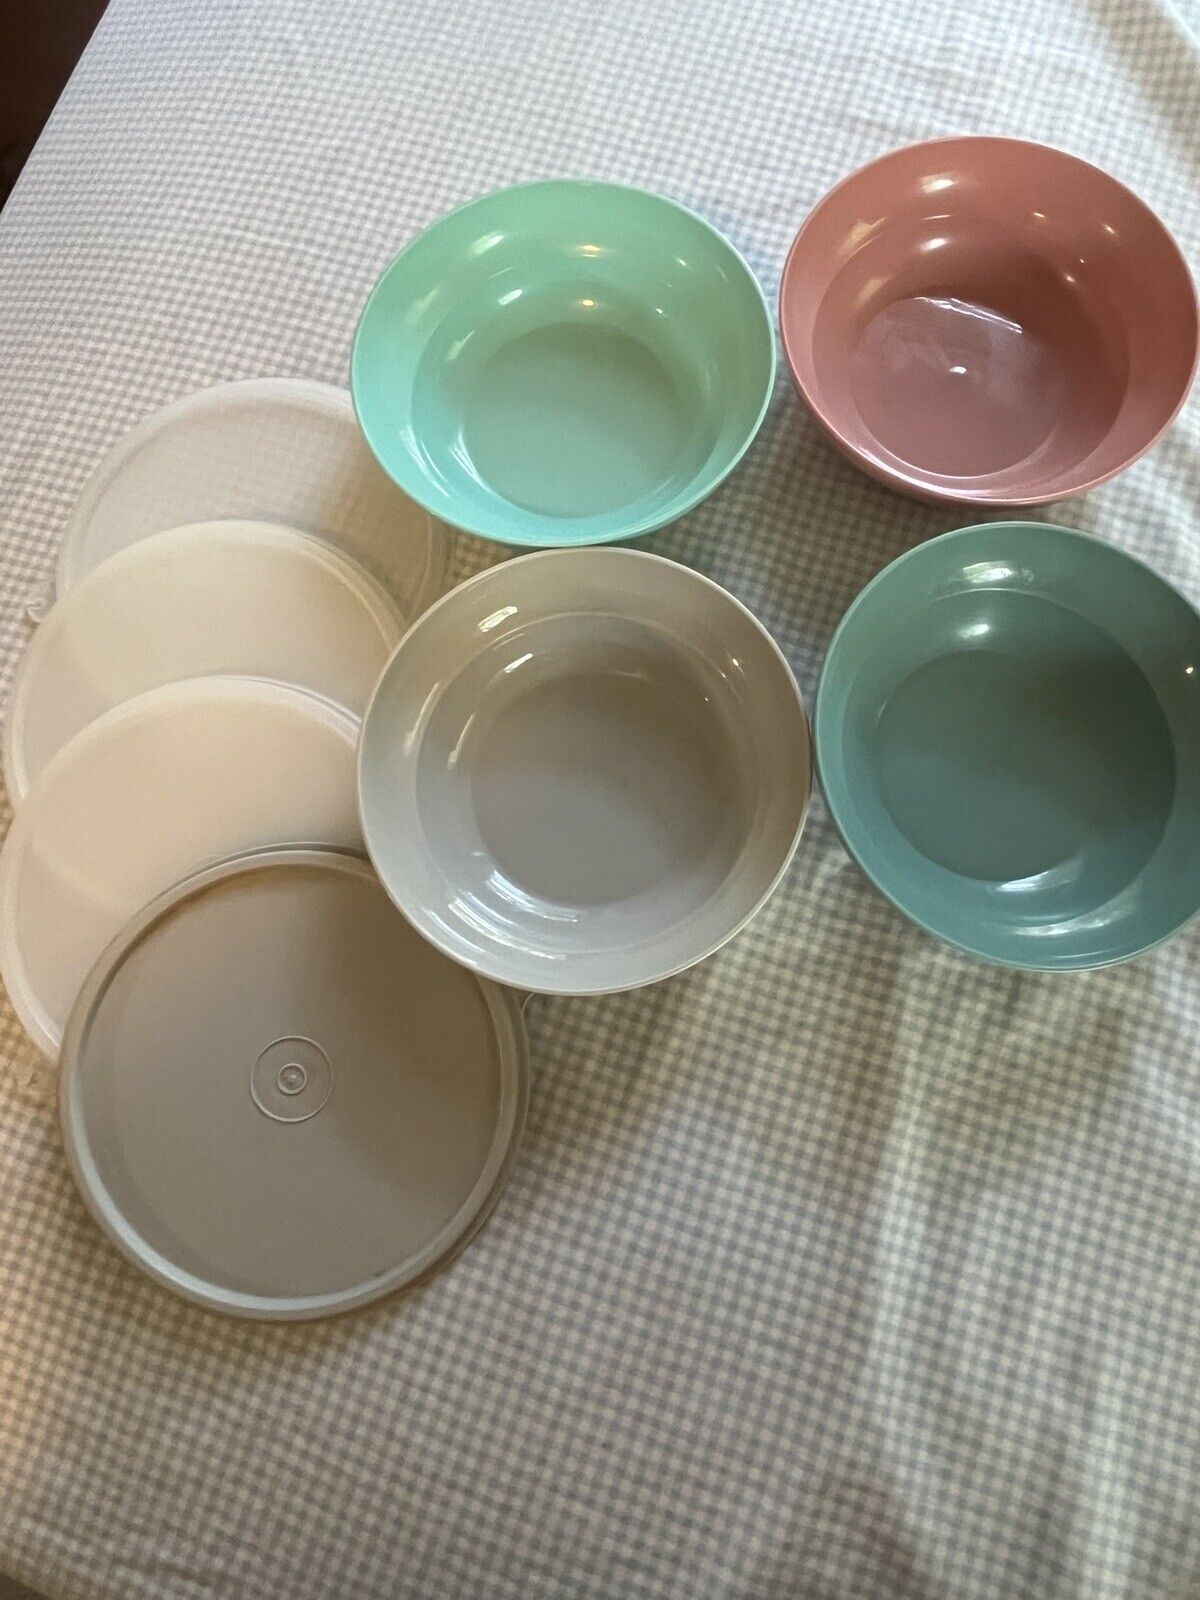 TUPPERWARE Vintage Cereal Bowls With/lids(3 Clear, 1 Gray), EUC